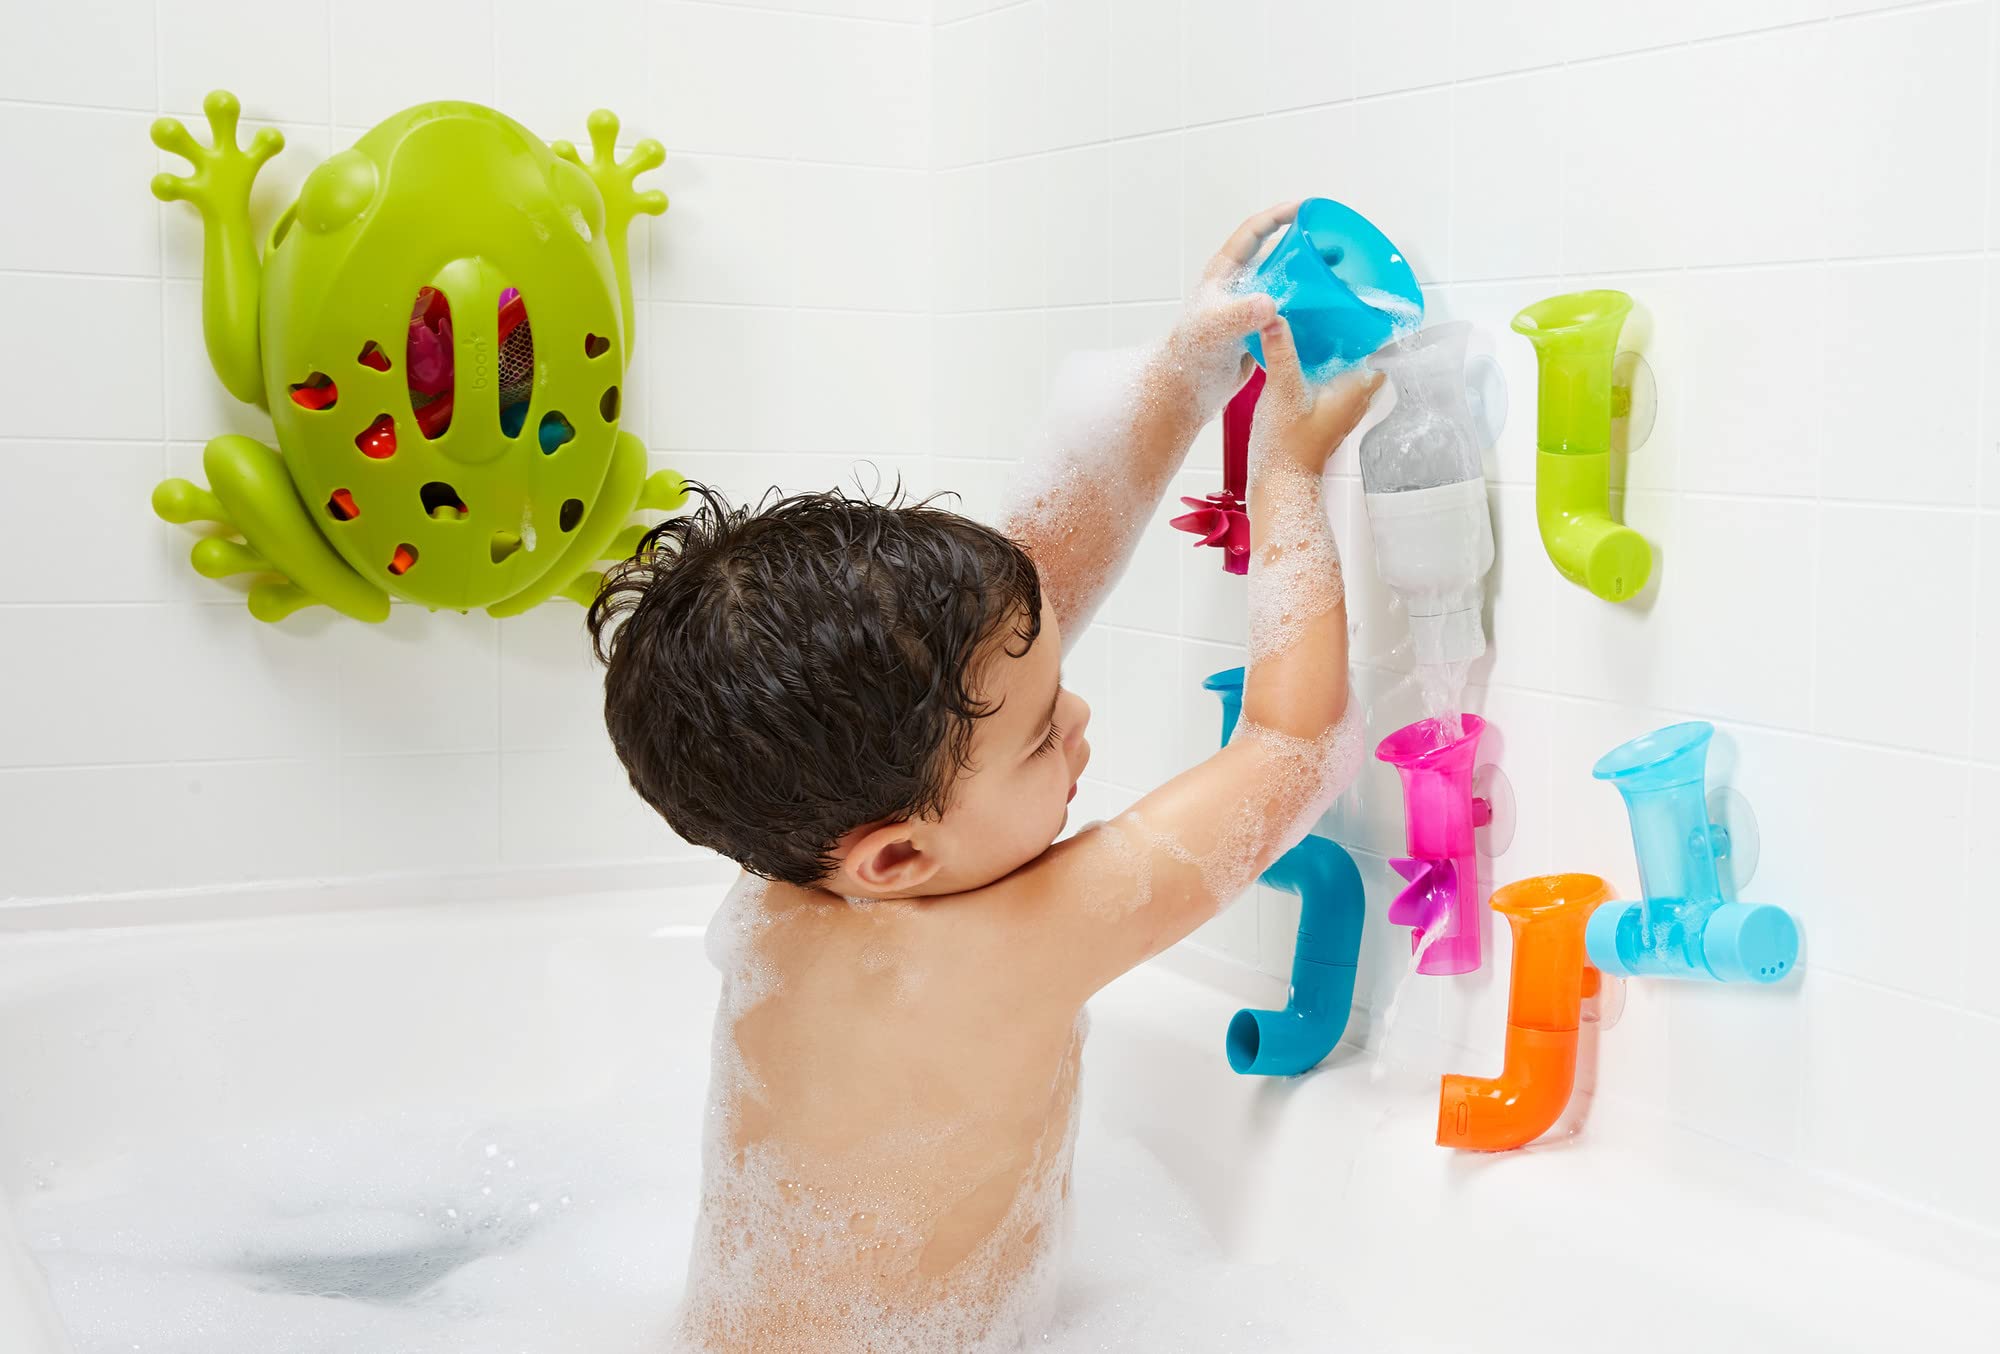 Boon PIPES Toddler Bath Toys - Toddler and Baby Bath Toys - Multicolored - Ages 12 Months and Up - 5 Count